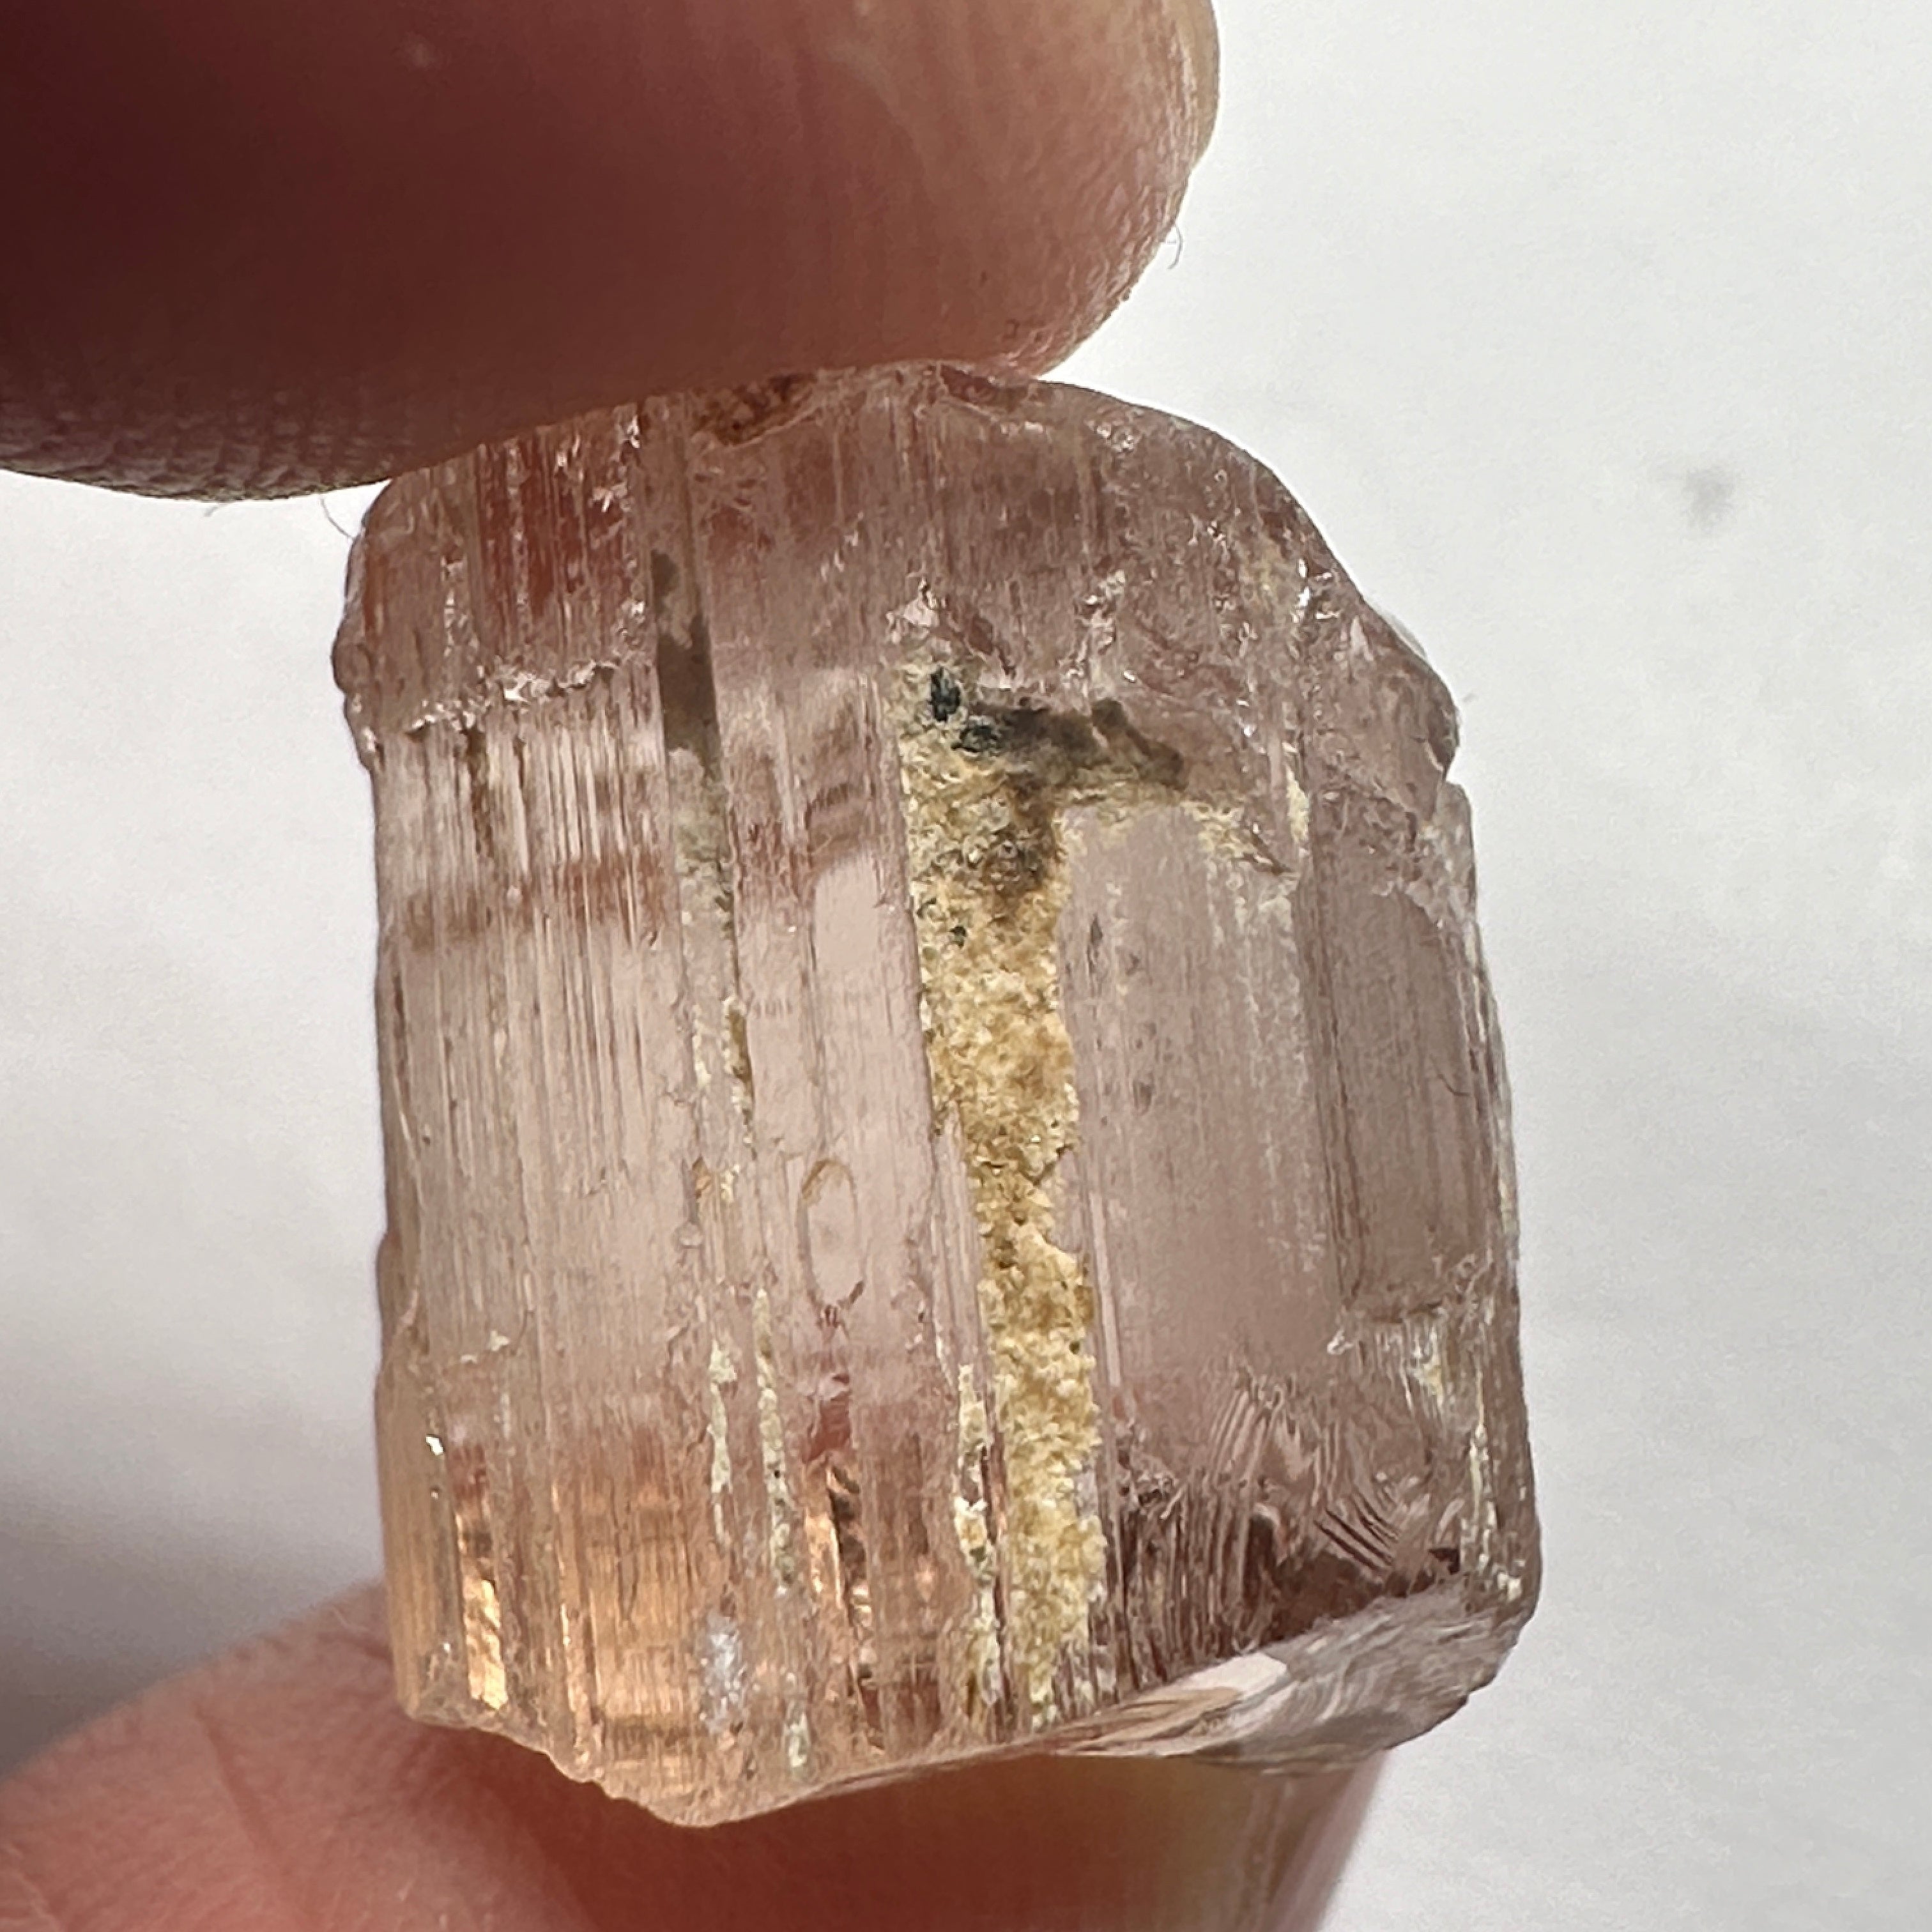 24.31ct Very Rare, Peach Pink Scapolite, Tanzania, Untreated Unheated, VVS-IF (flawless)